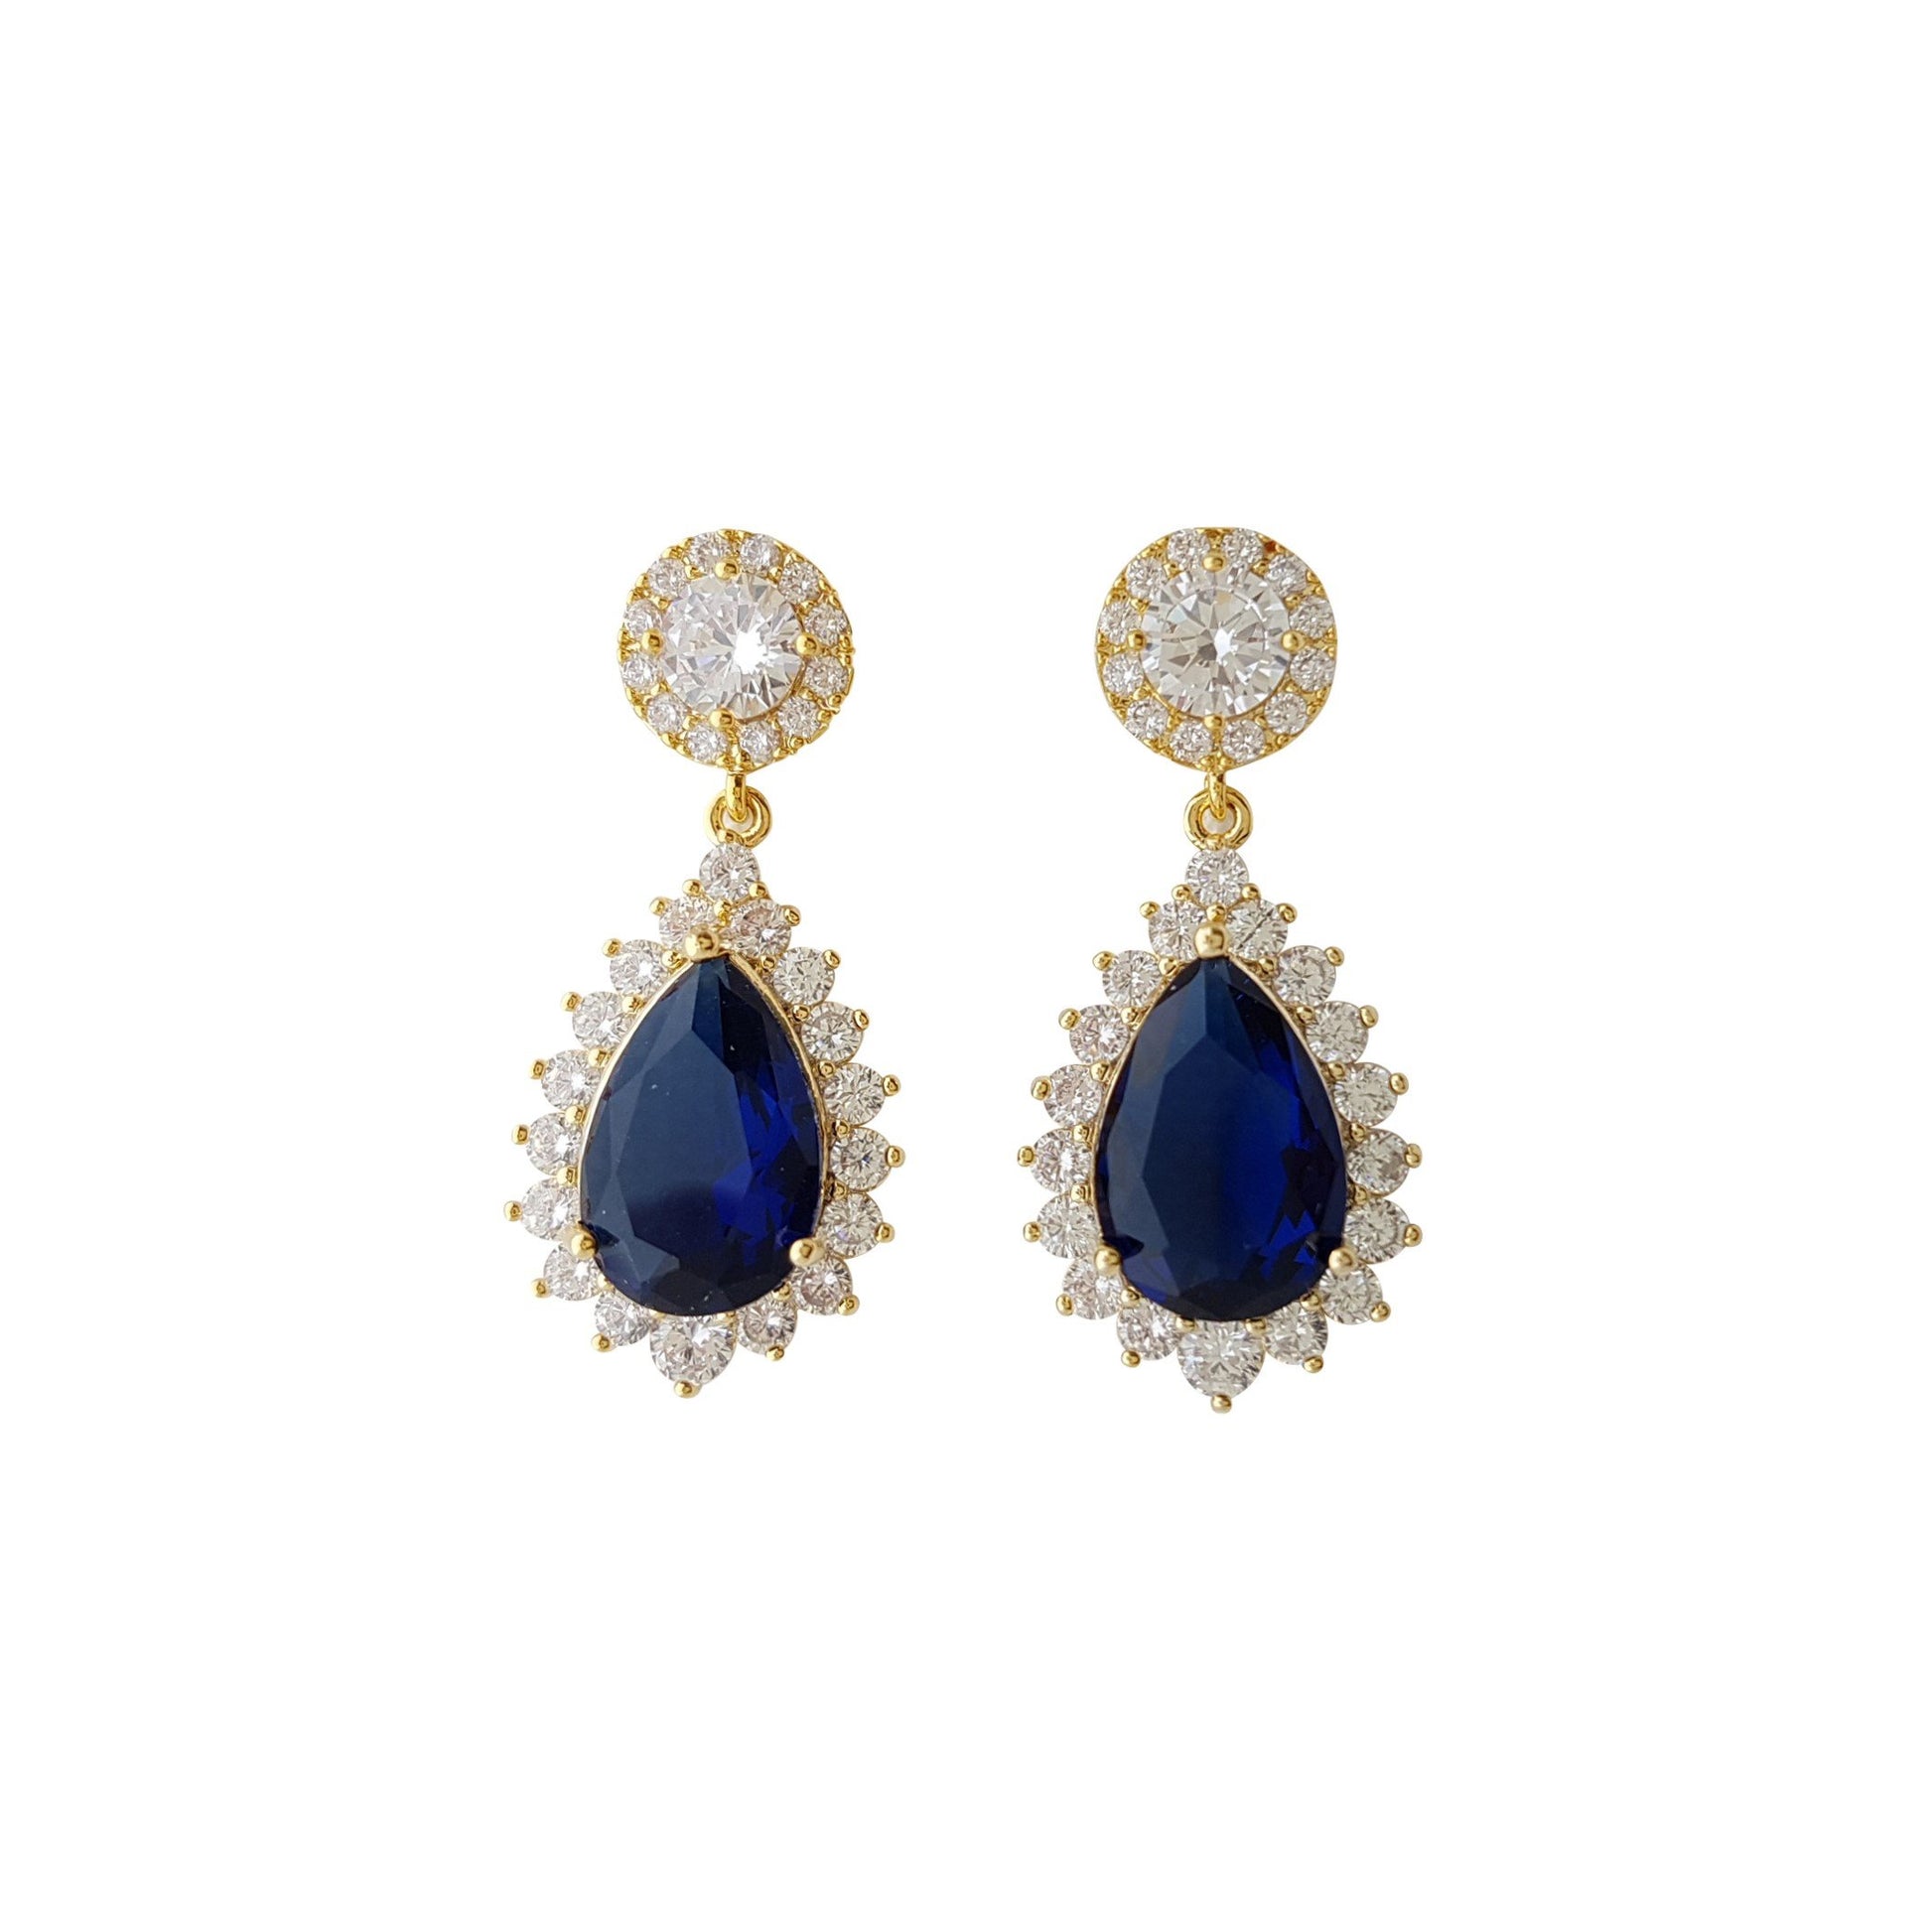 14K Gold blue stone earrings drop made of Cubic Zirconia- Poetry Designs